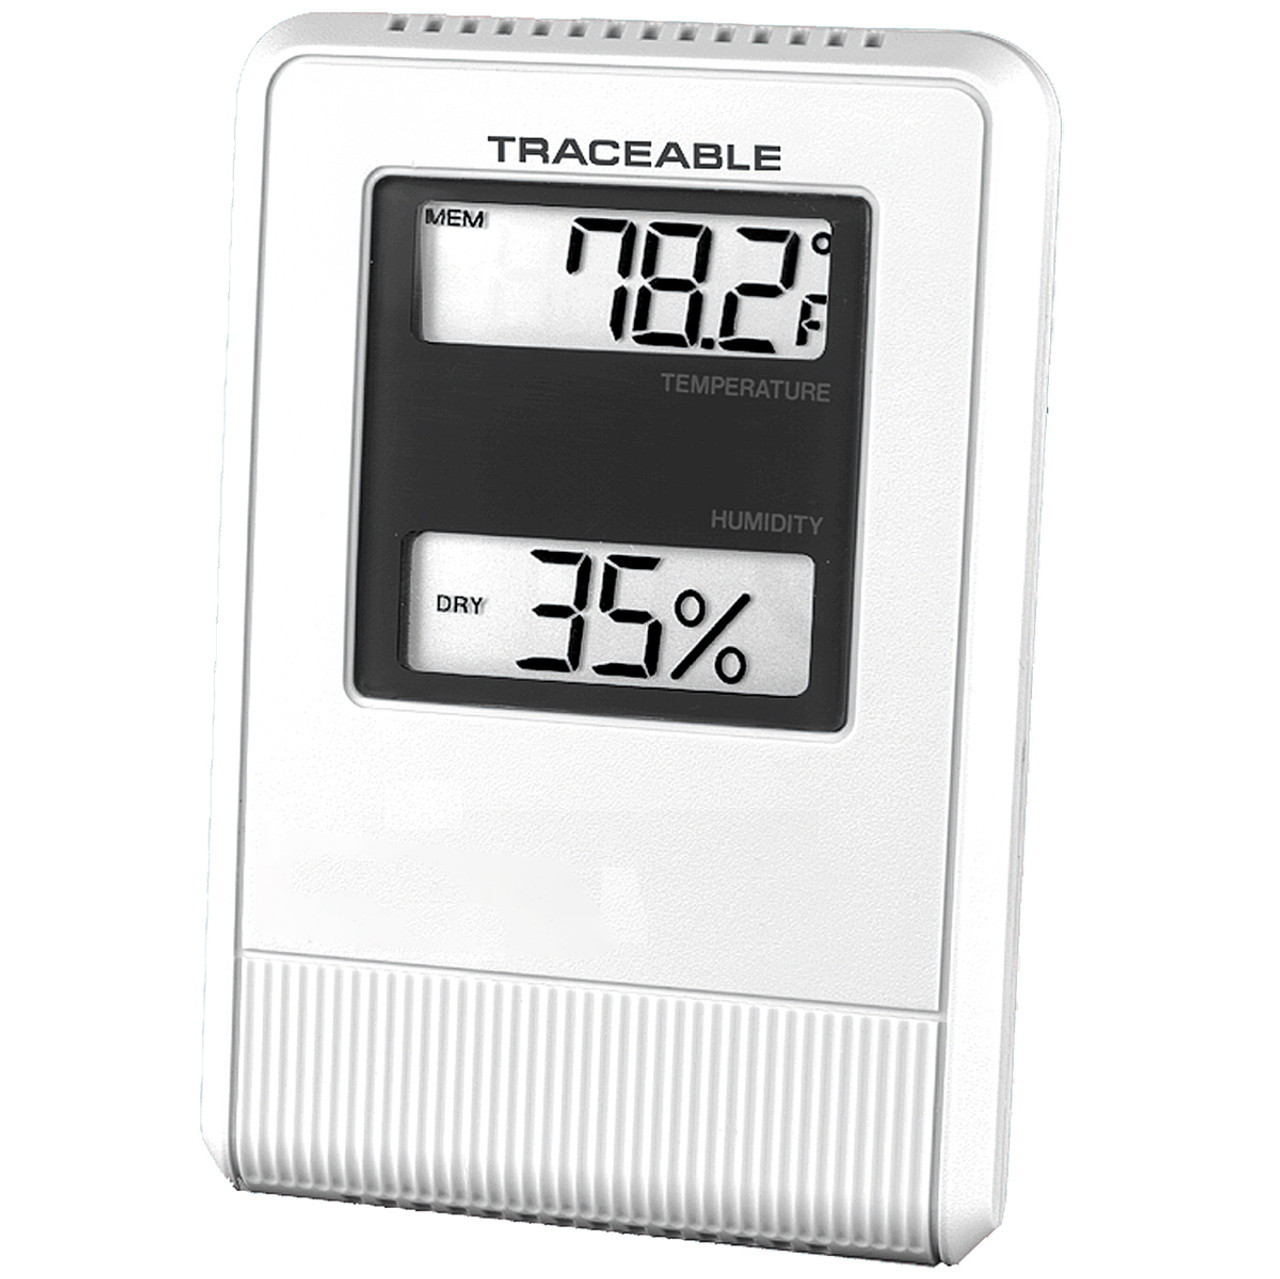 Traceable WD-90000-75 Big-Digit Indoor/Outdoor Digital Thermometer with 1  Bullet Probe, –58 to 158°F, 0.1°F Temp Resolution, NIST-Traceable Cal